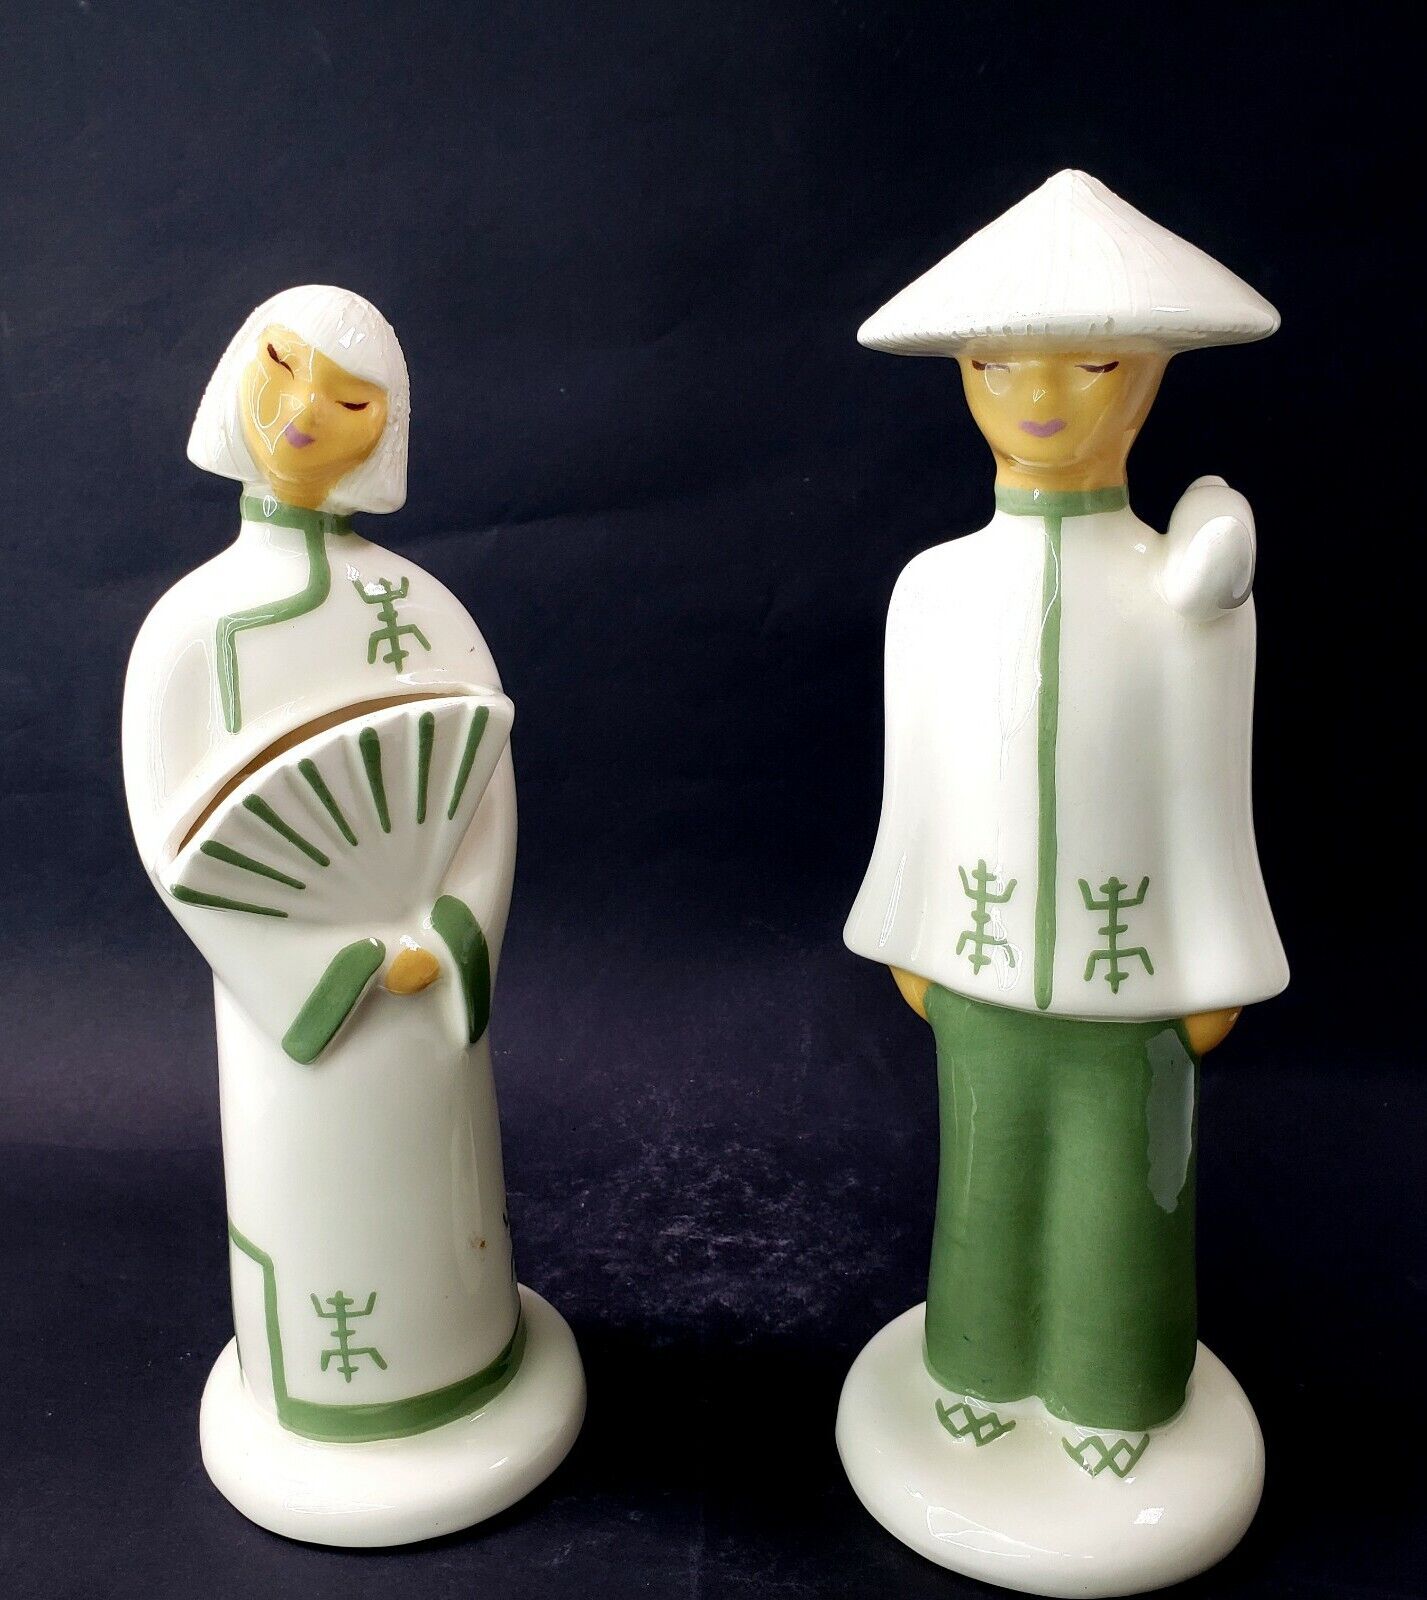 VTG 1940’s Art Pottery Chinese Figurines Set Signed Heidi Schoop Hollywood, CA 